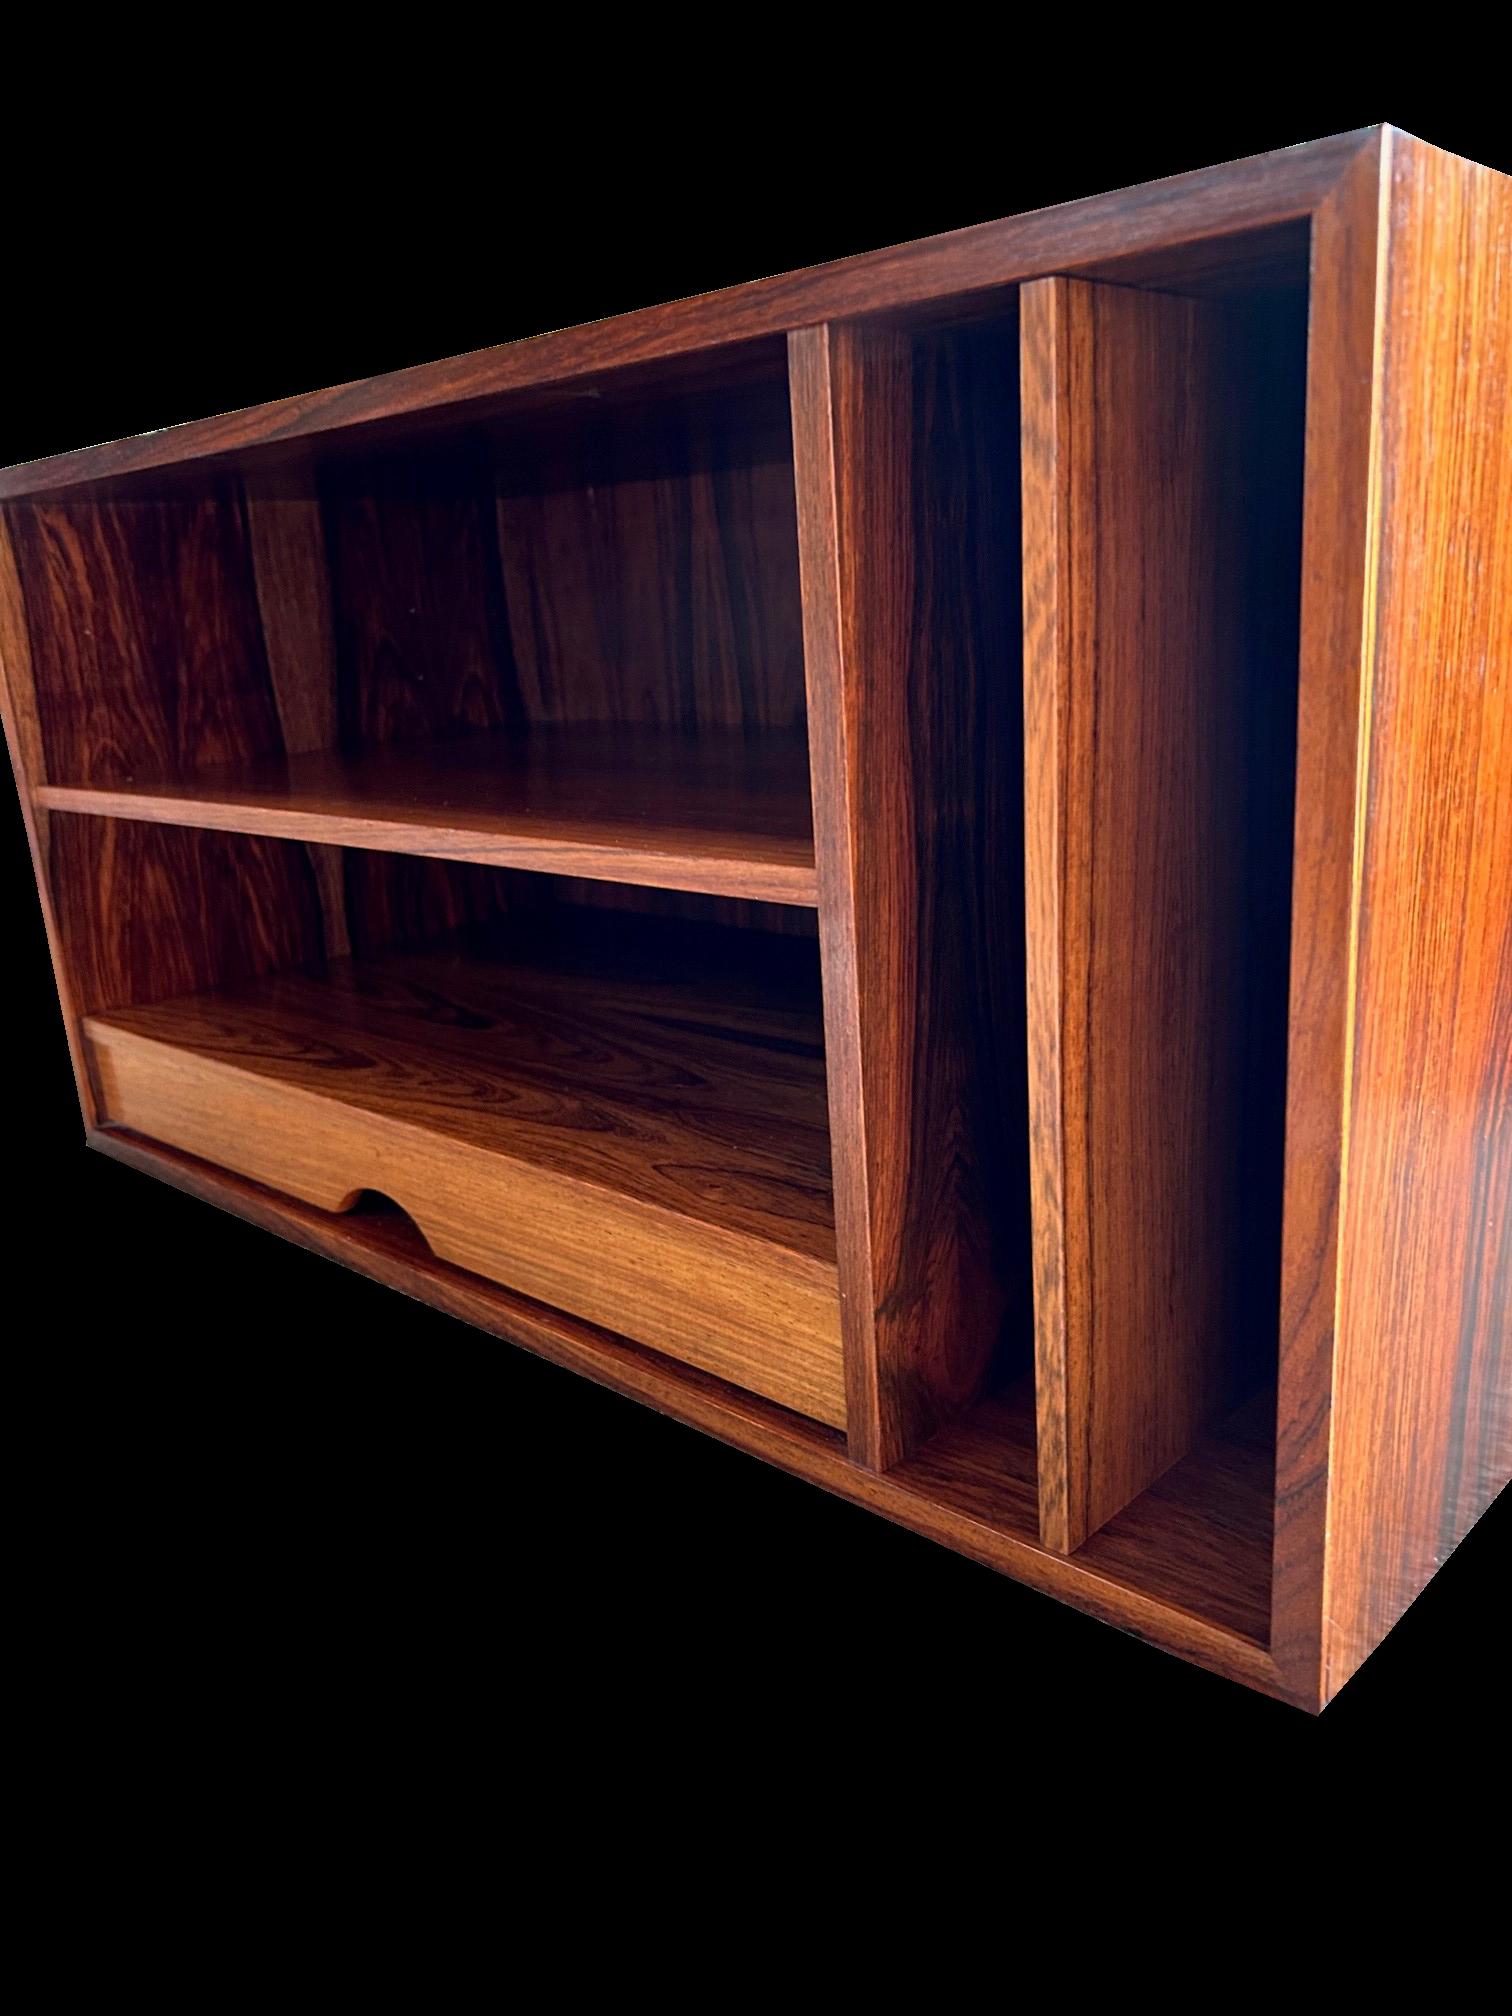 A very cool Santos Rosewood cabinet for your records and turntable, made in Norway by Bruksbo and in great condition.